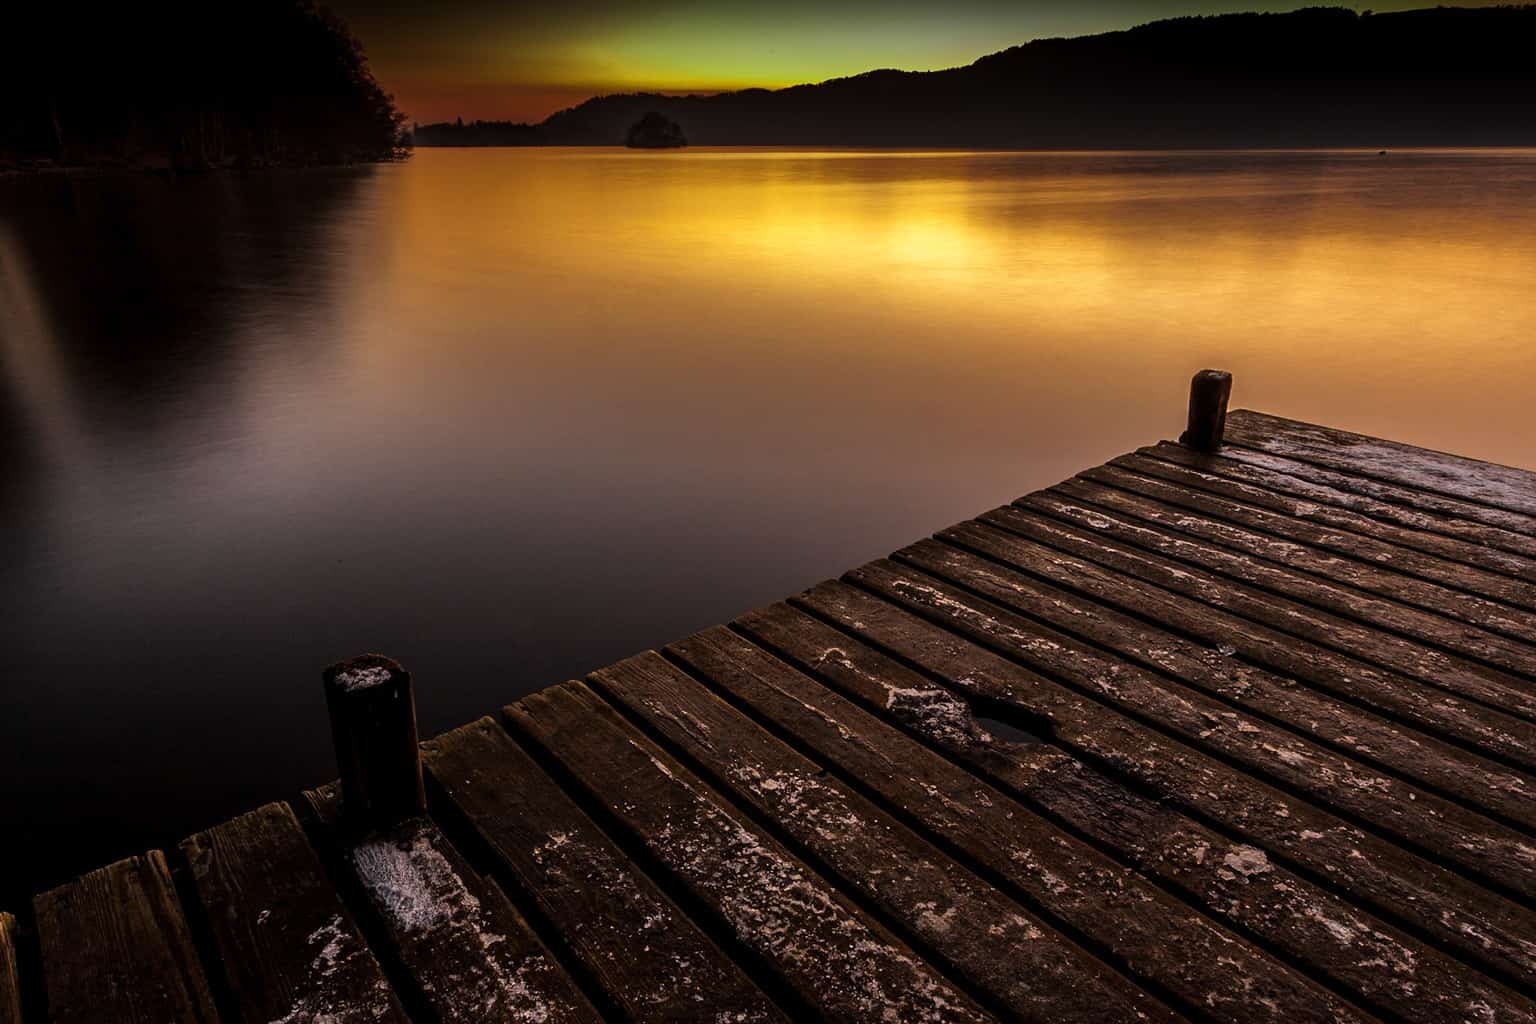  Lake Windermere at sunset - the original composition 